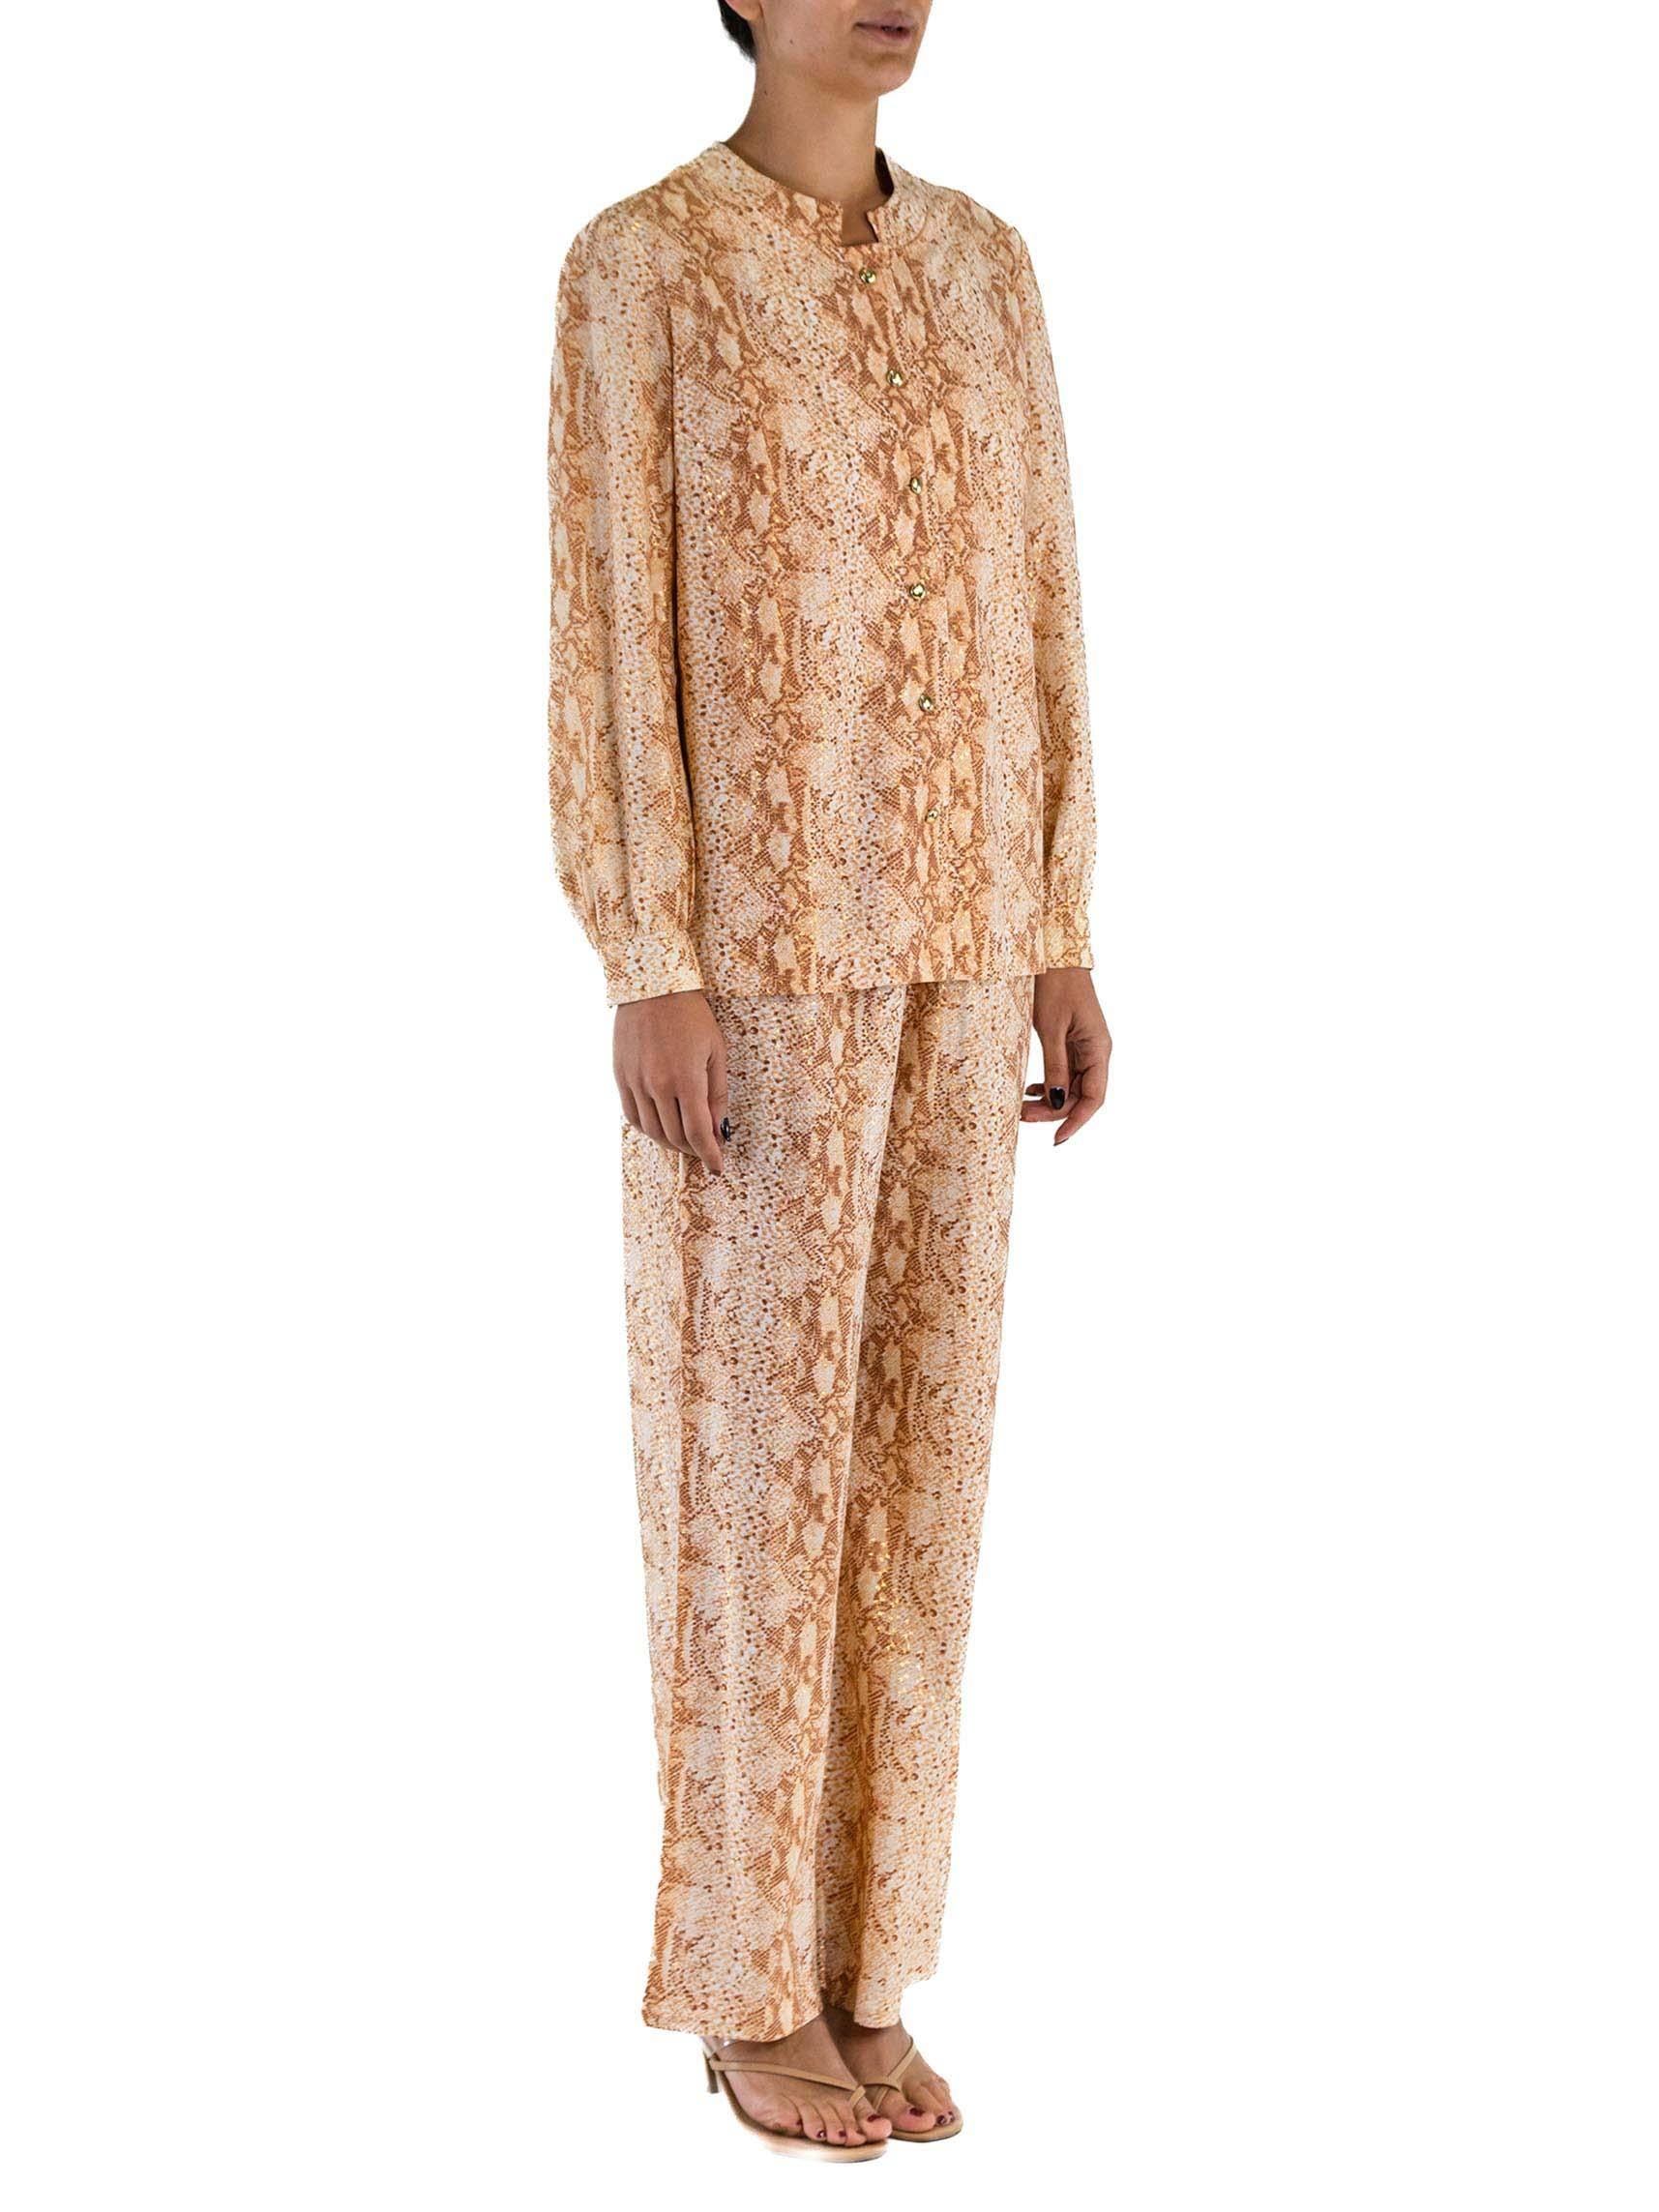 1970S Gold Snake Print Poly/Lurex Fine Knit Shirt & Pants Ensemble In Excellent Condition For Sale In New York, NY